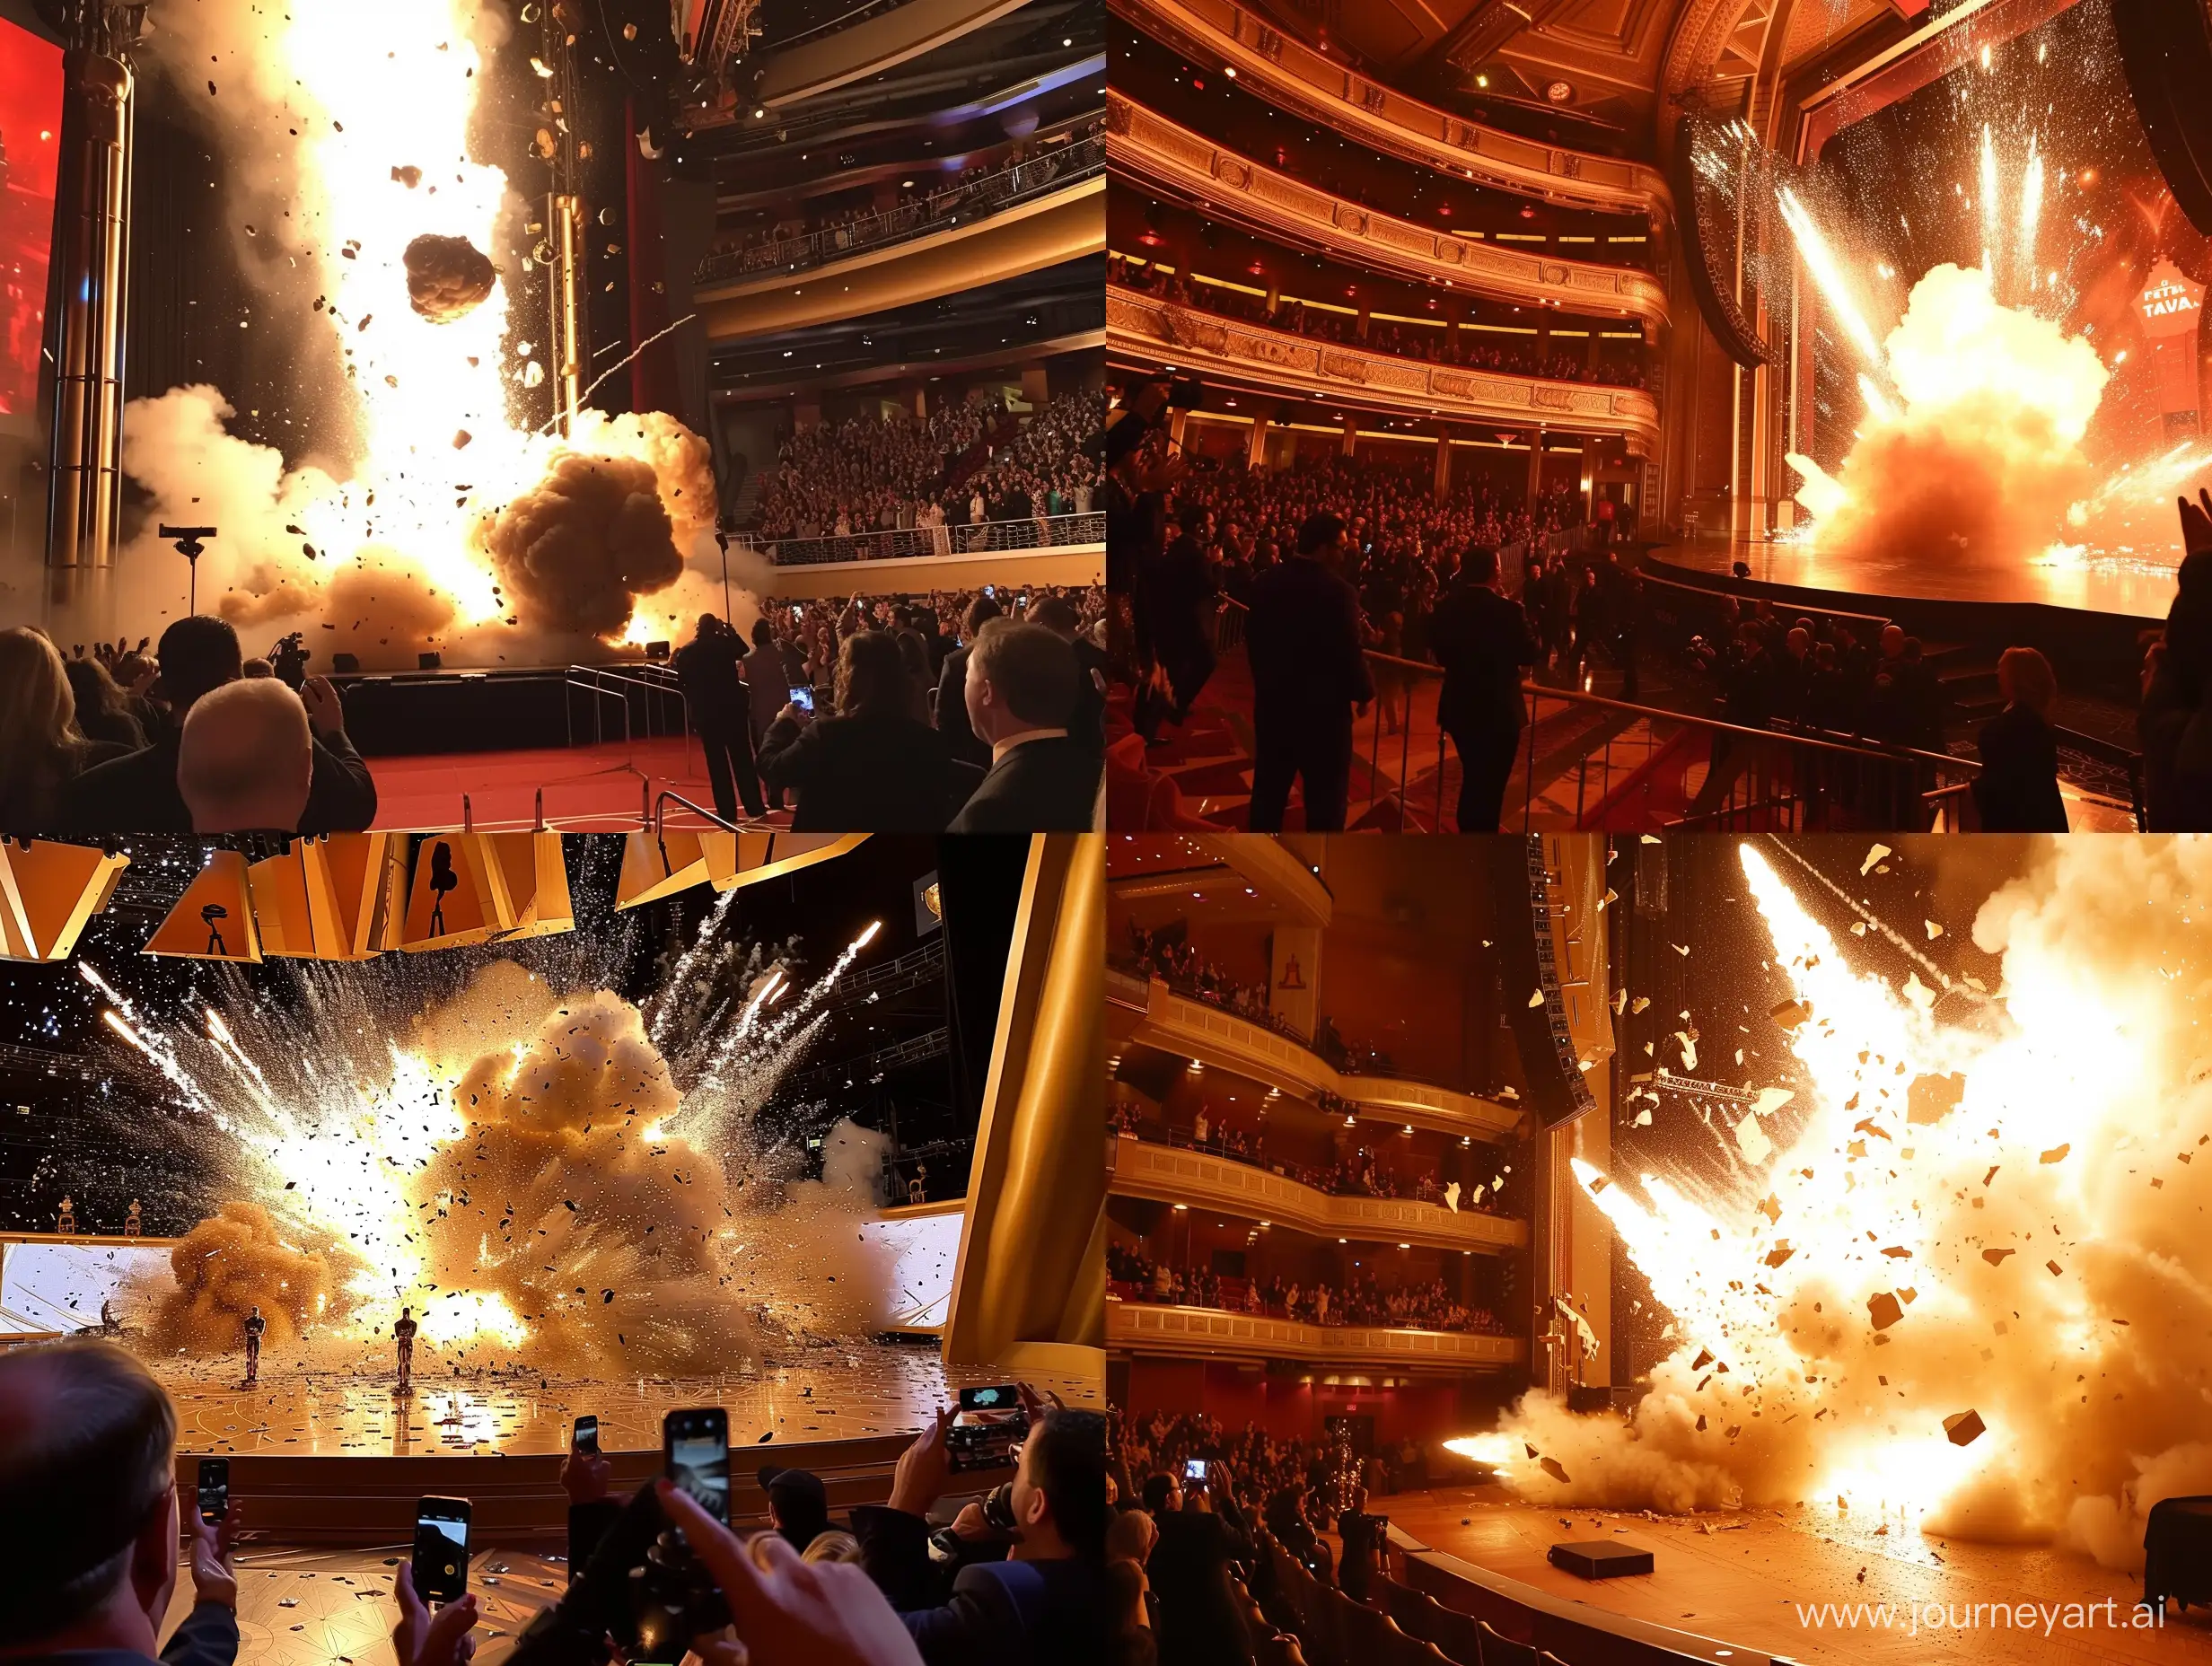 phone footage of an explosion at the oscars